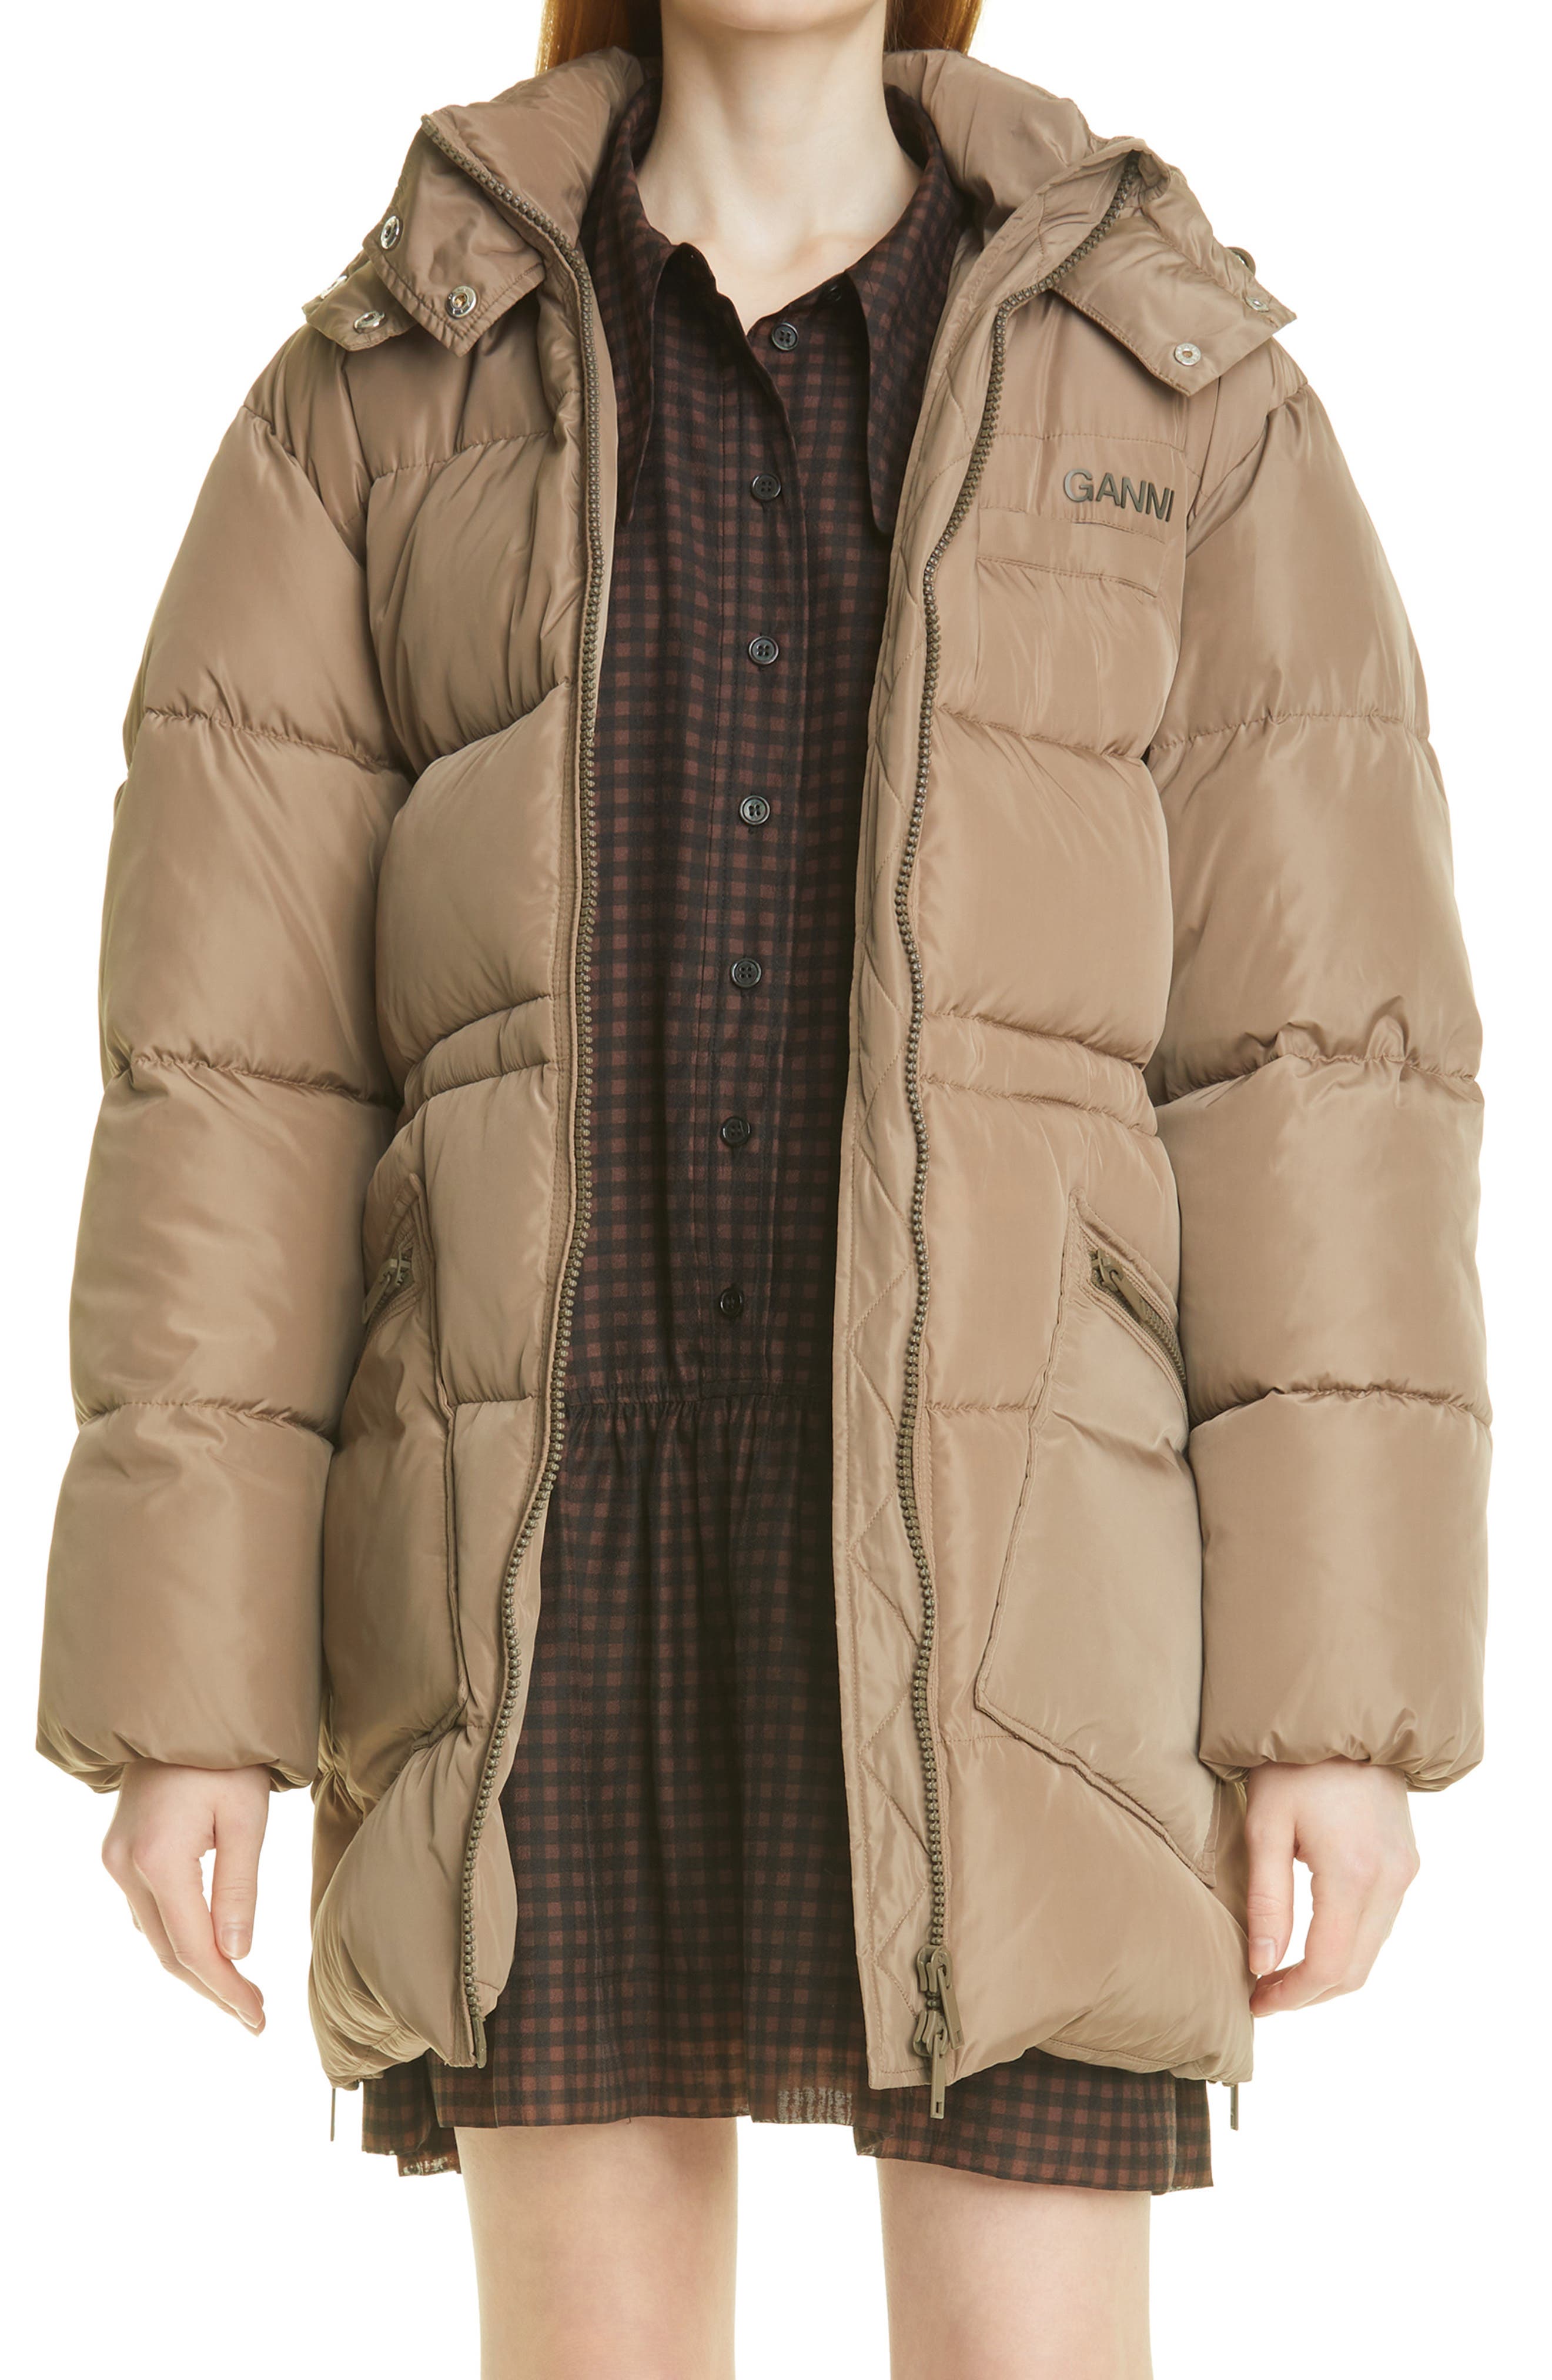 Ganni Oversize Puffer Jacket in Fossil at Nordstrom, Size Small